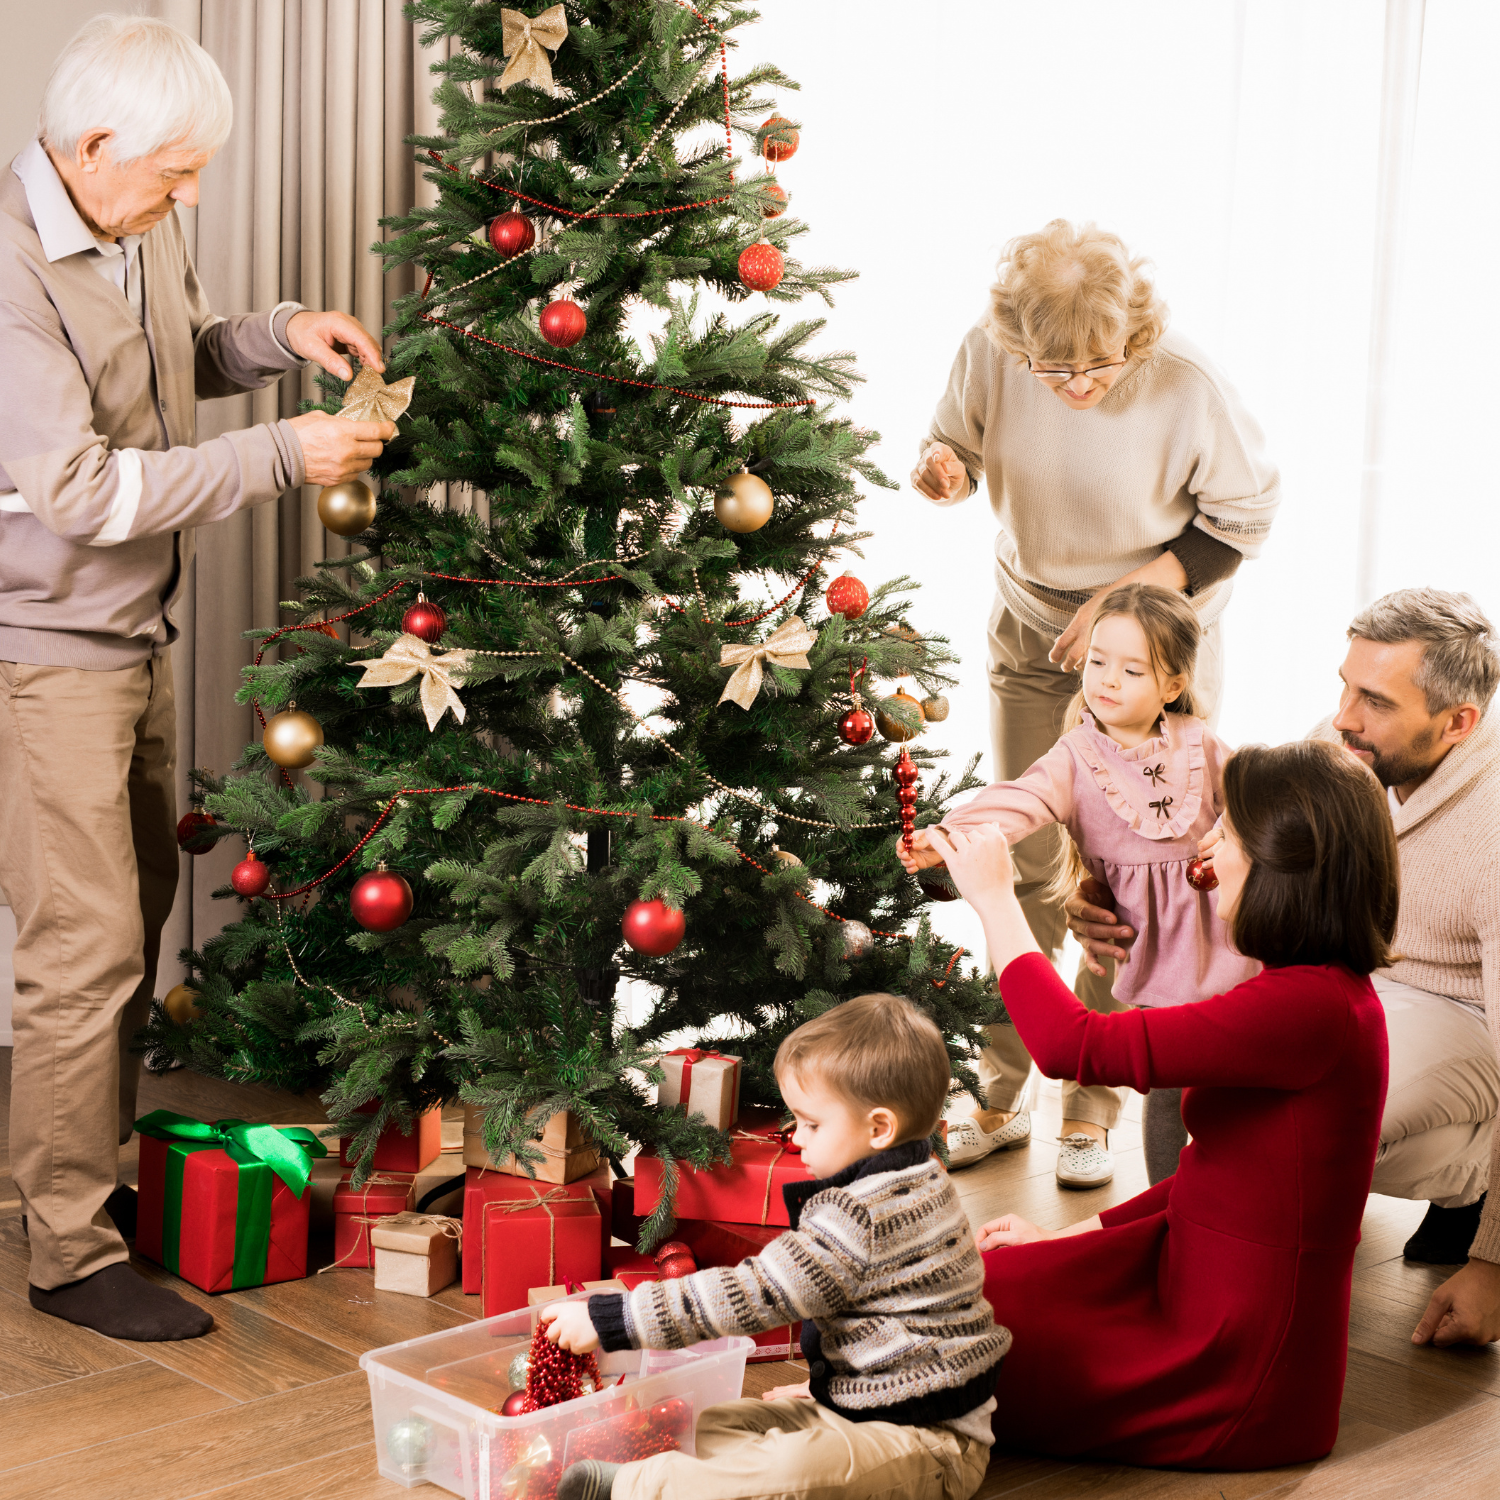 Family with two children decorating the christmas tree with white and red decorations | Family Christmas - Clair de Lune UK